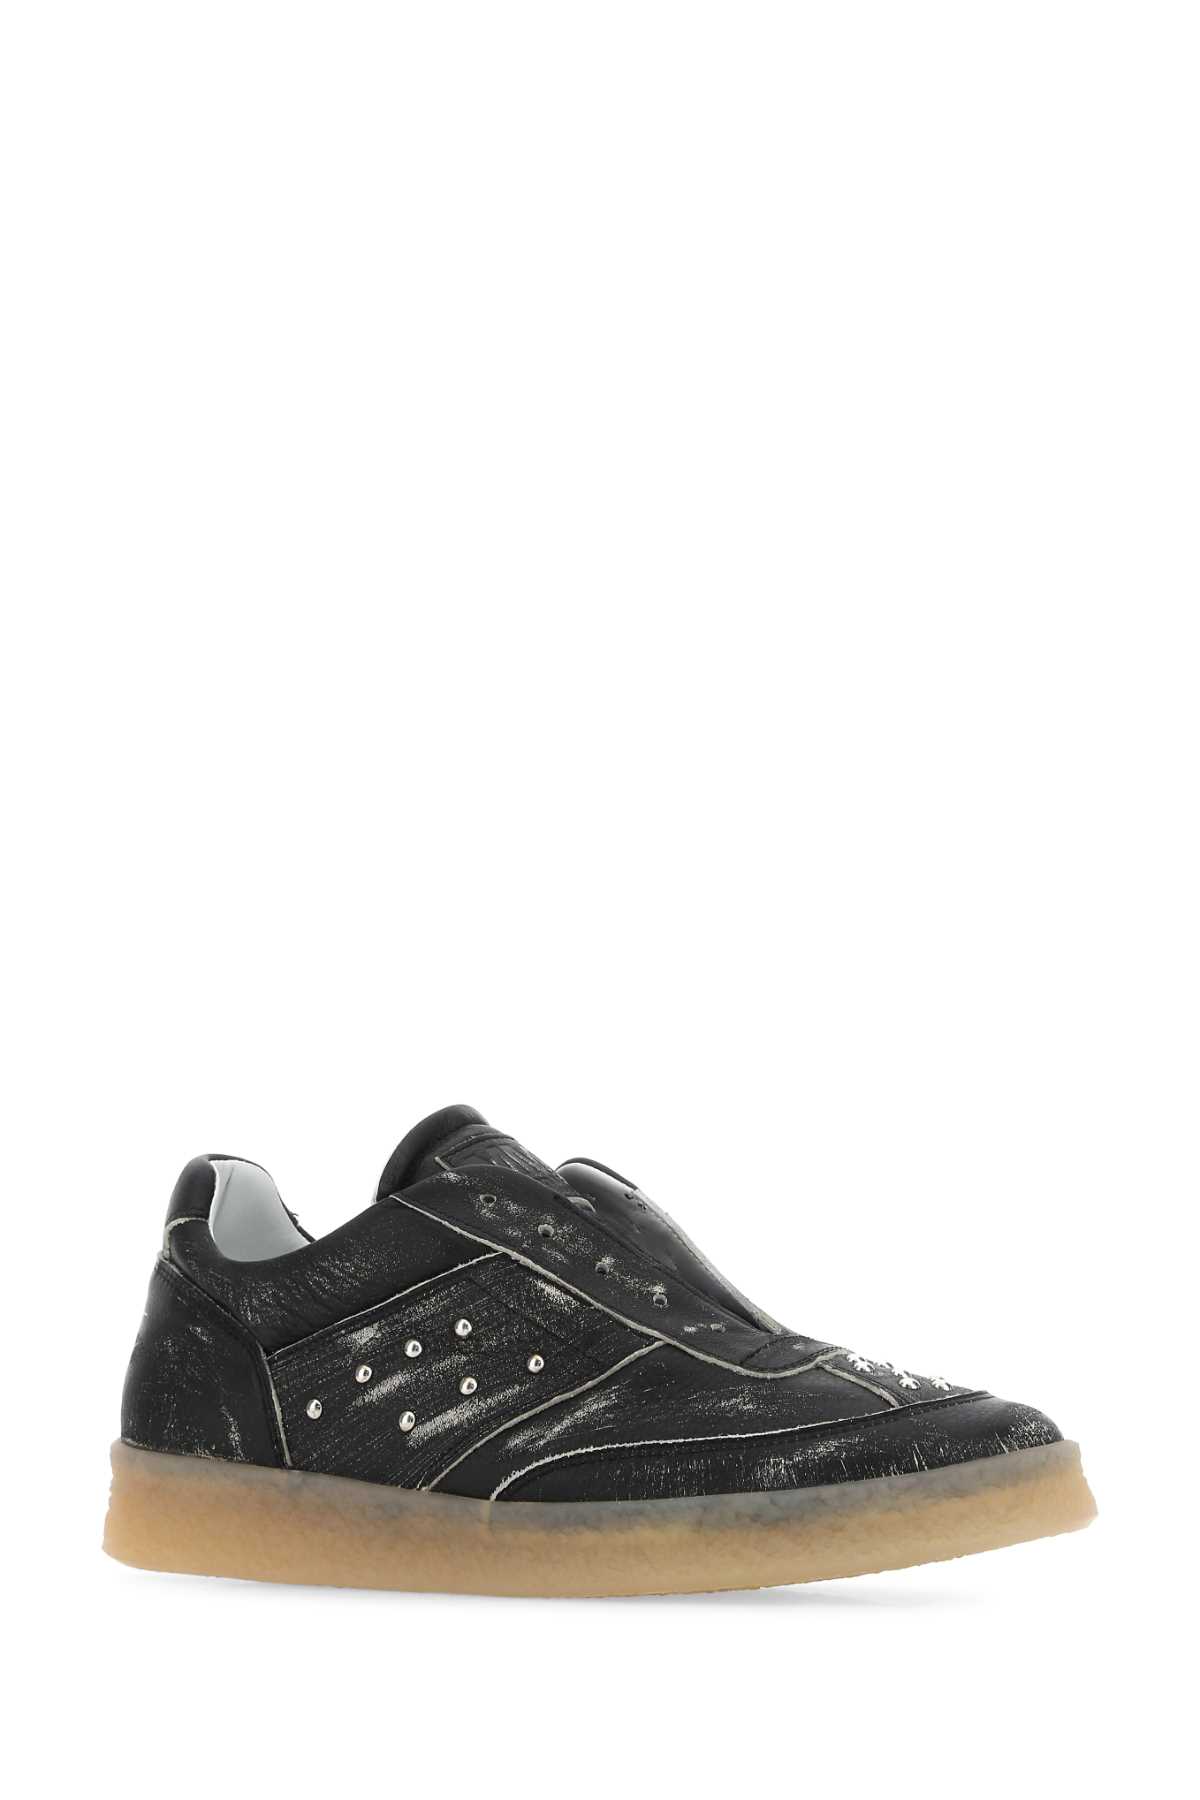 Mm6 Maison Margiela Black Leather Trainers In T8013